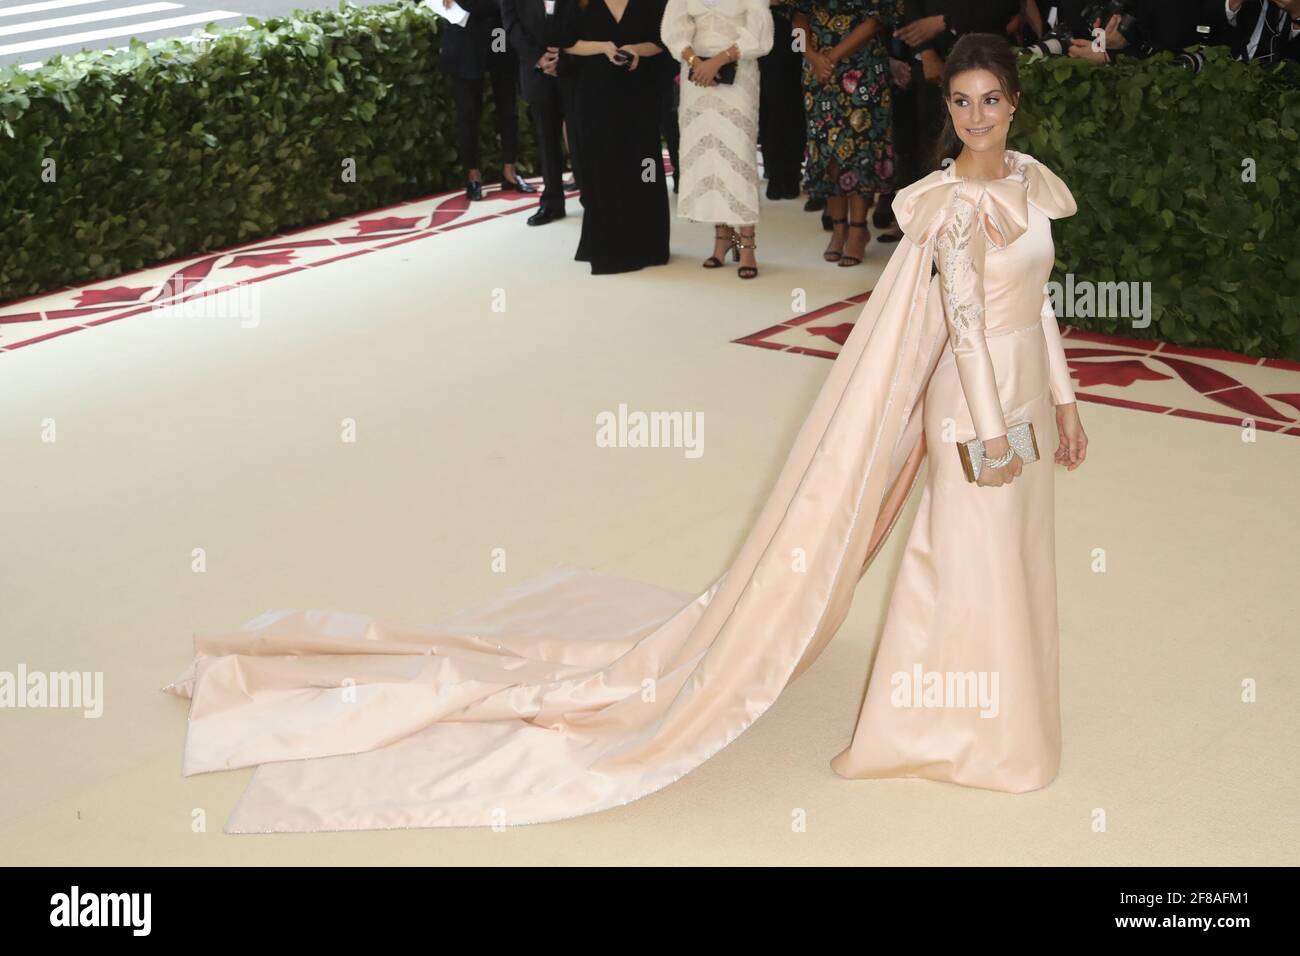 Ariana Rockefeller during the 2018 Met Costume Gala Heavenly Bodies, held at the Metropolitan Museum of Art in New York City, Monday, May 7, 2018. Photo by Jennifer Graylock-Graylock.com 917-519-7666 Stock Photo